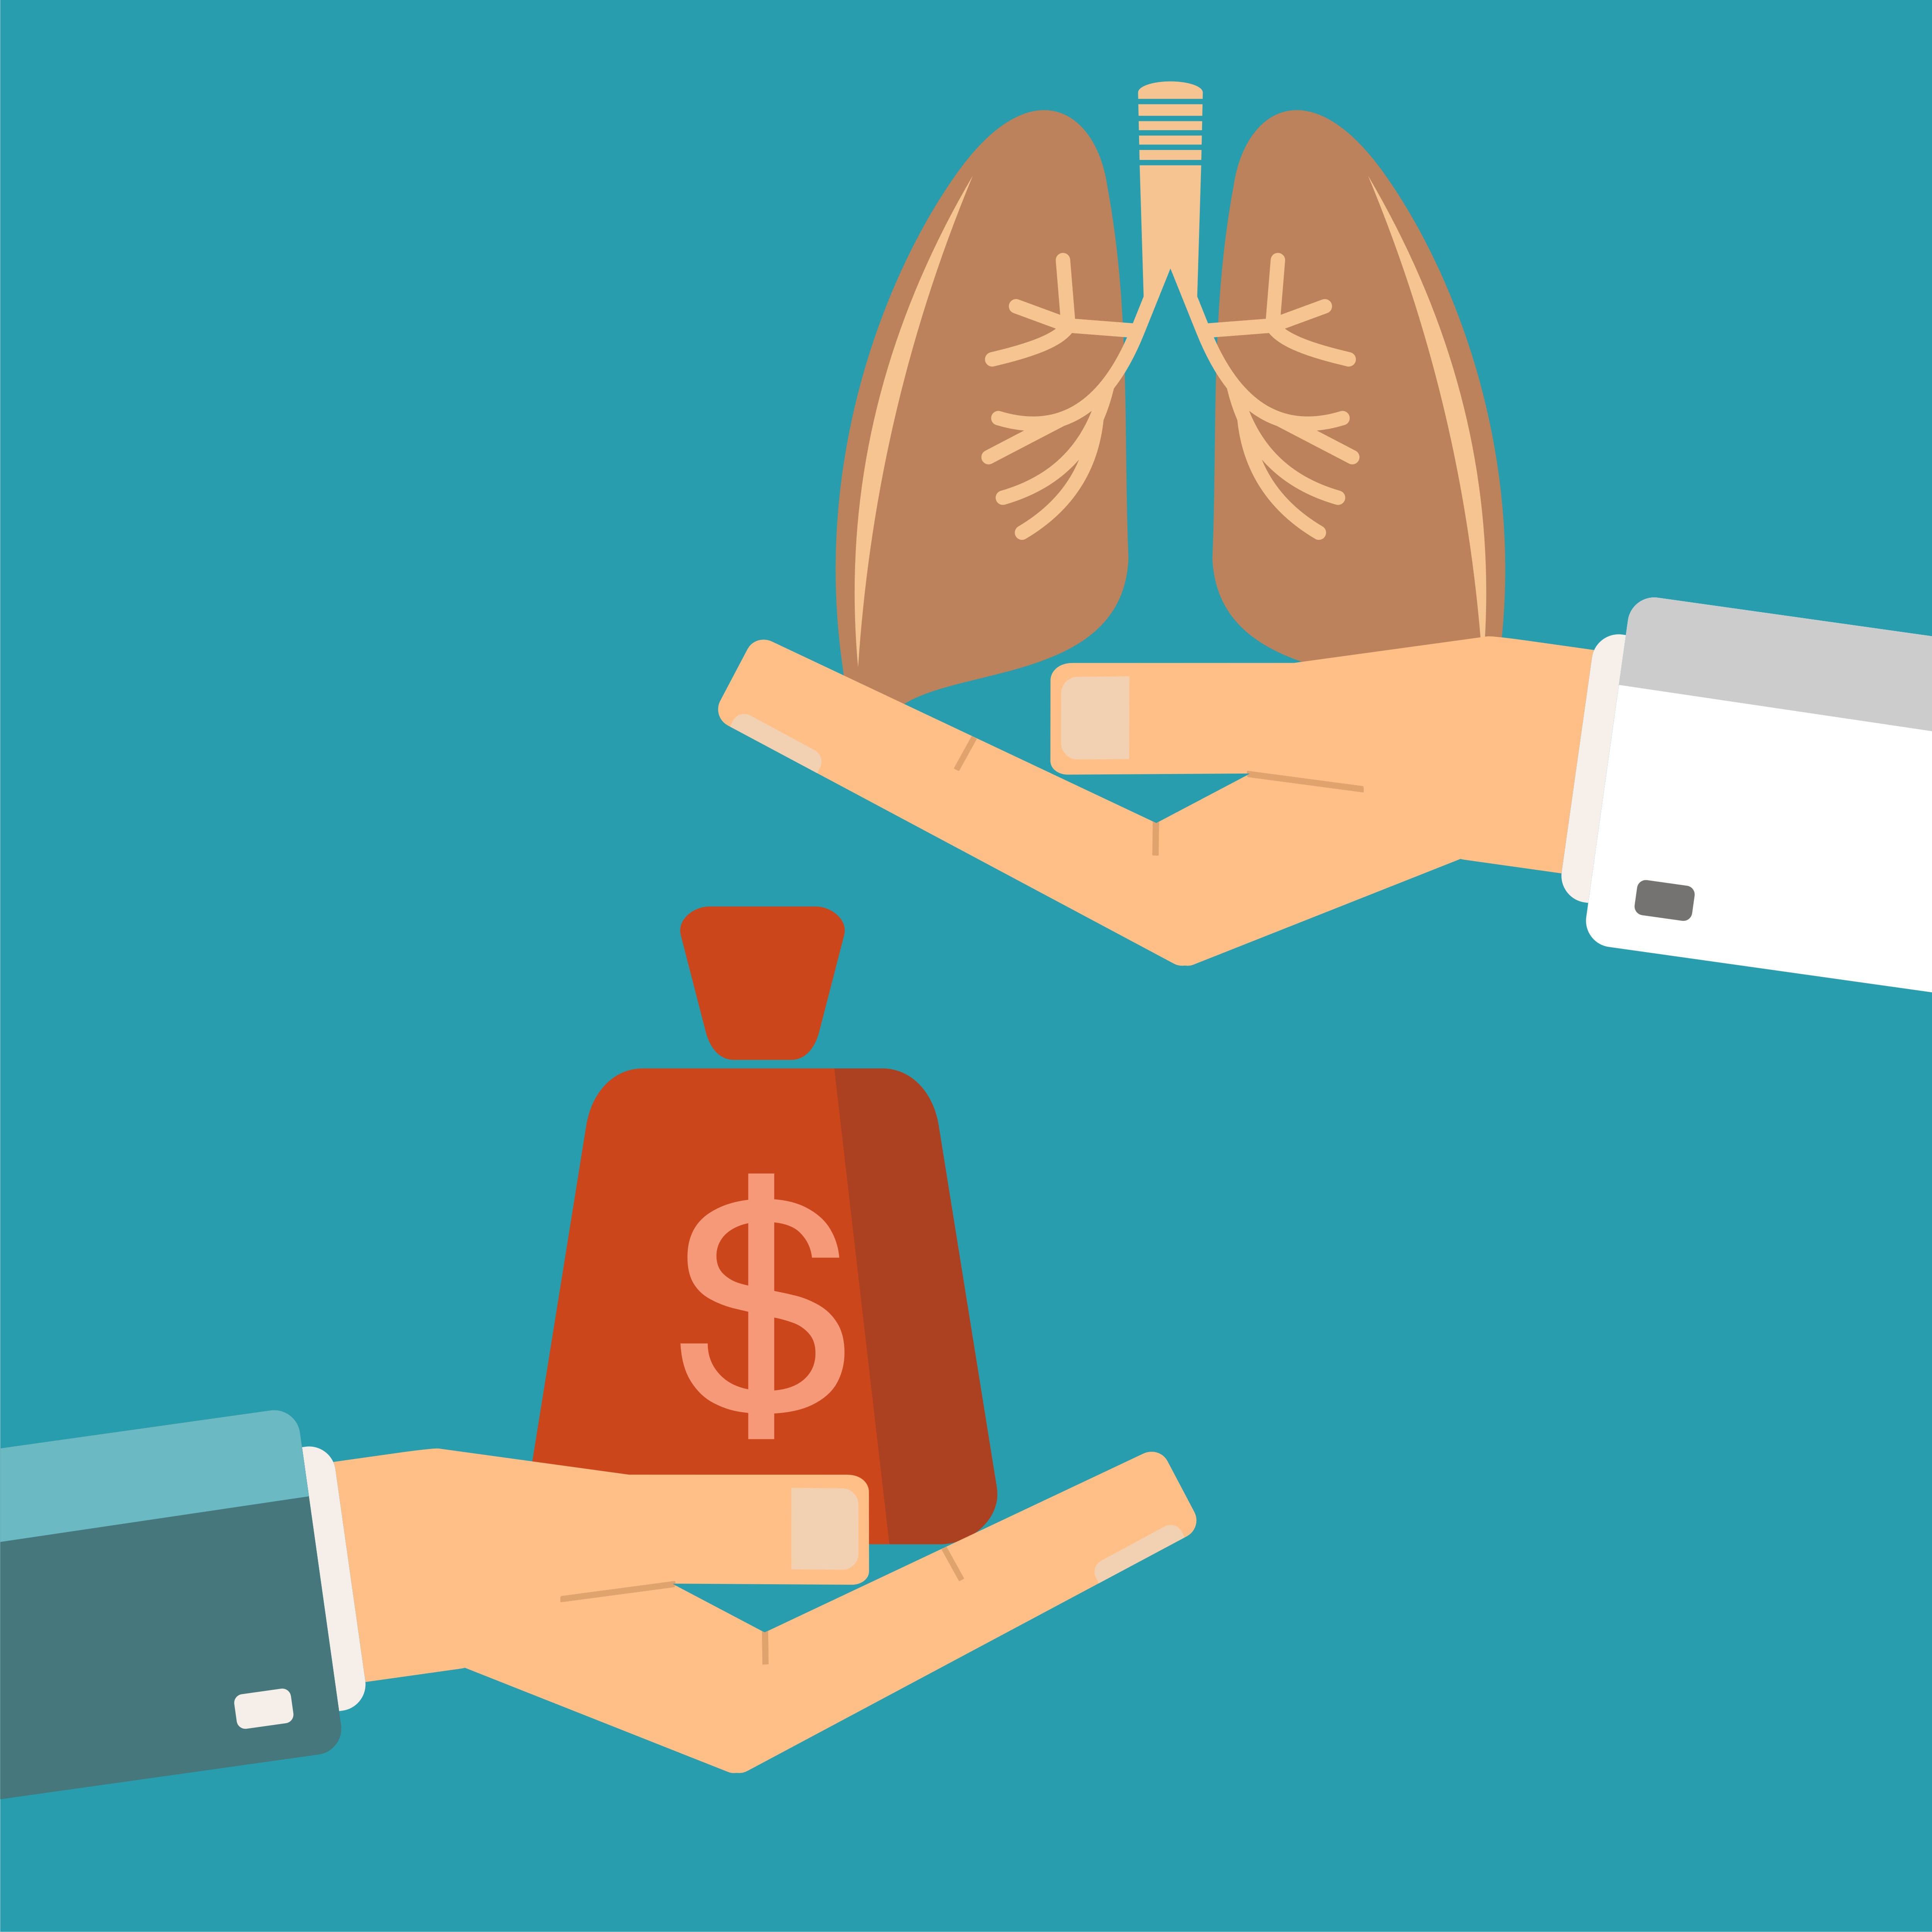 Money for lung health.